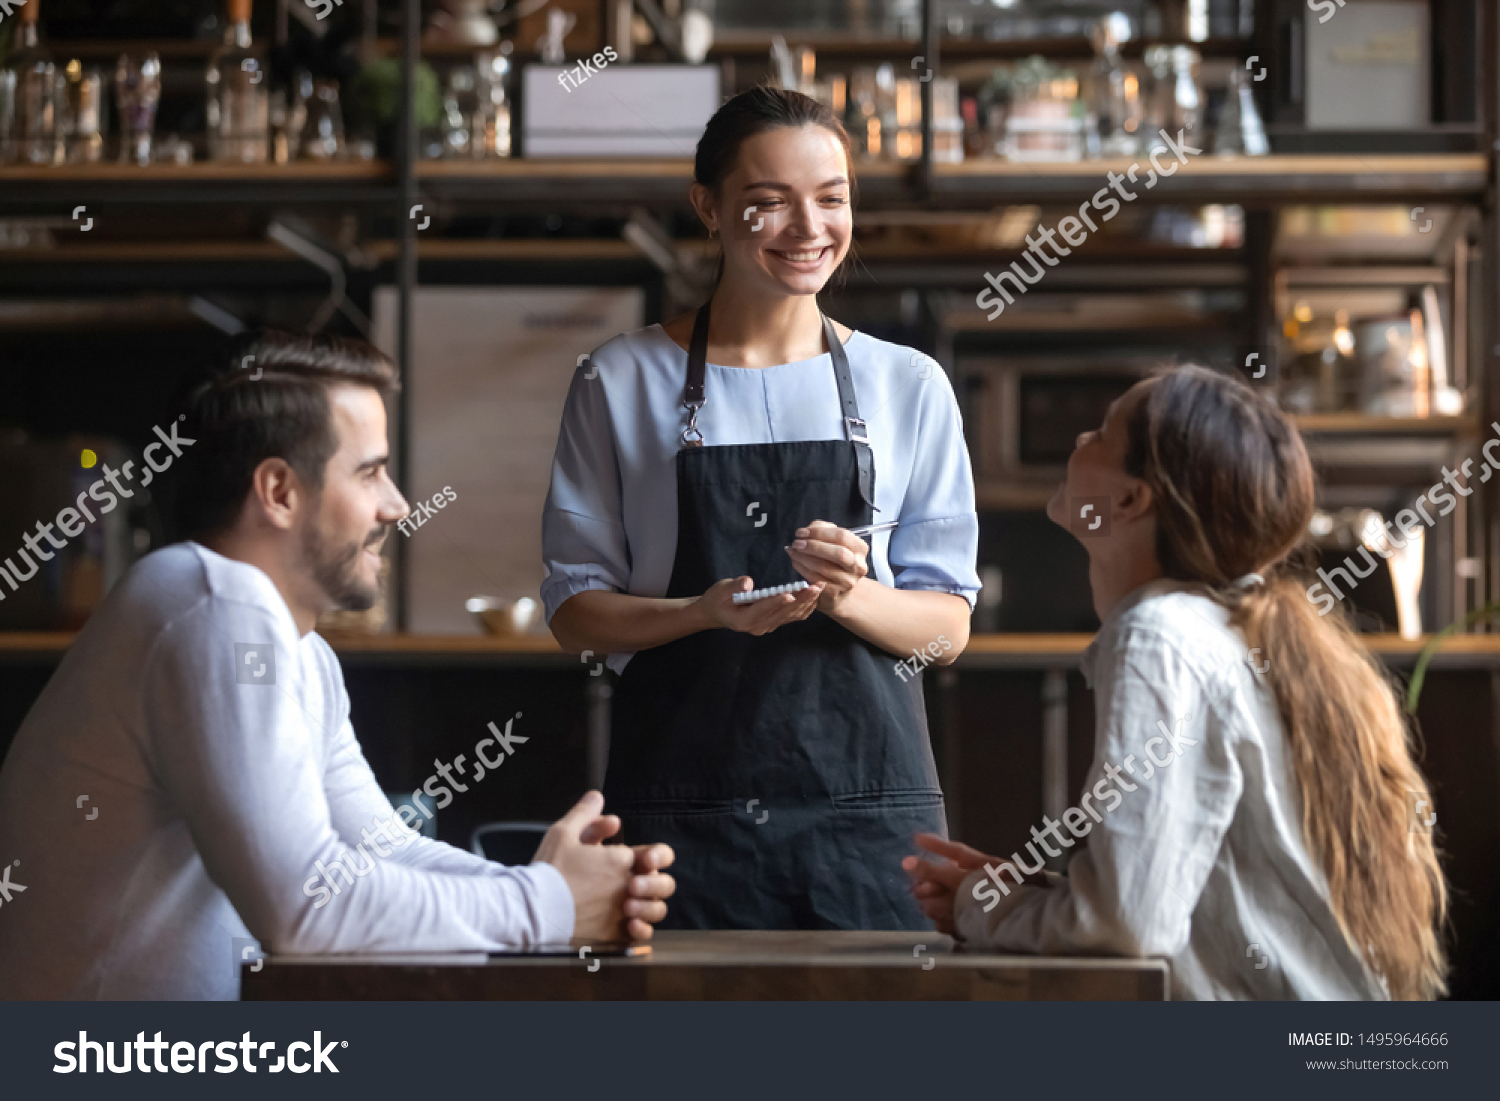 Smiling waitress wear apron hold notepad pen take order talk to clients serving restaurant guests couple choosing food drinks menu sit at cafe coffeehouse table, waiting staff, good customer service #1495964666